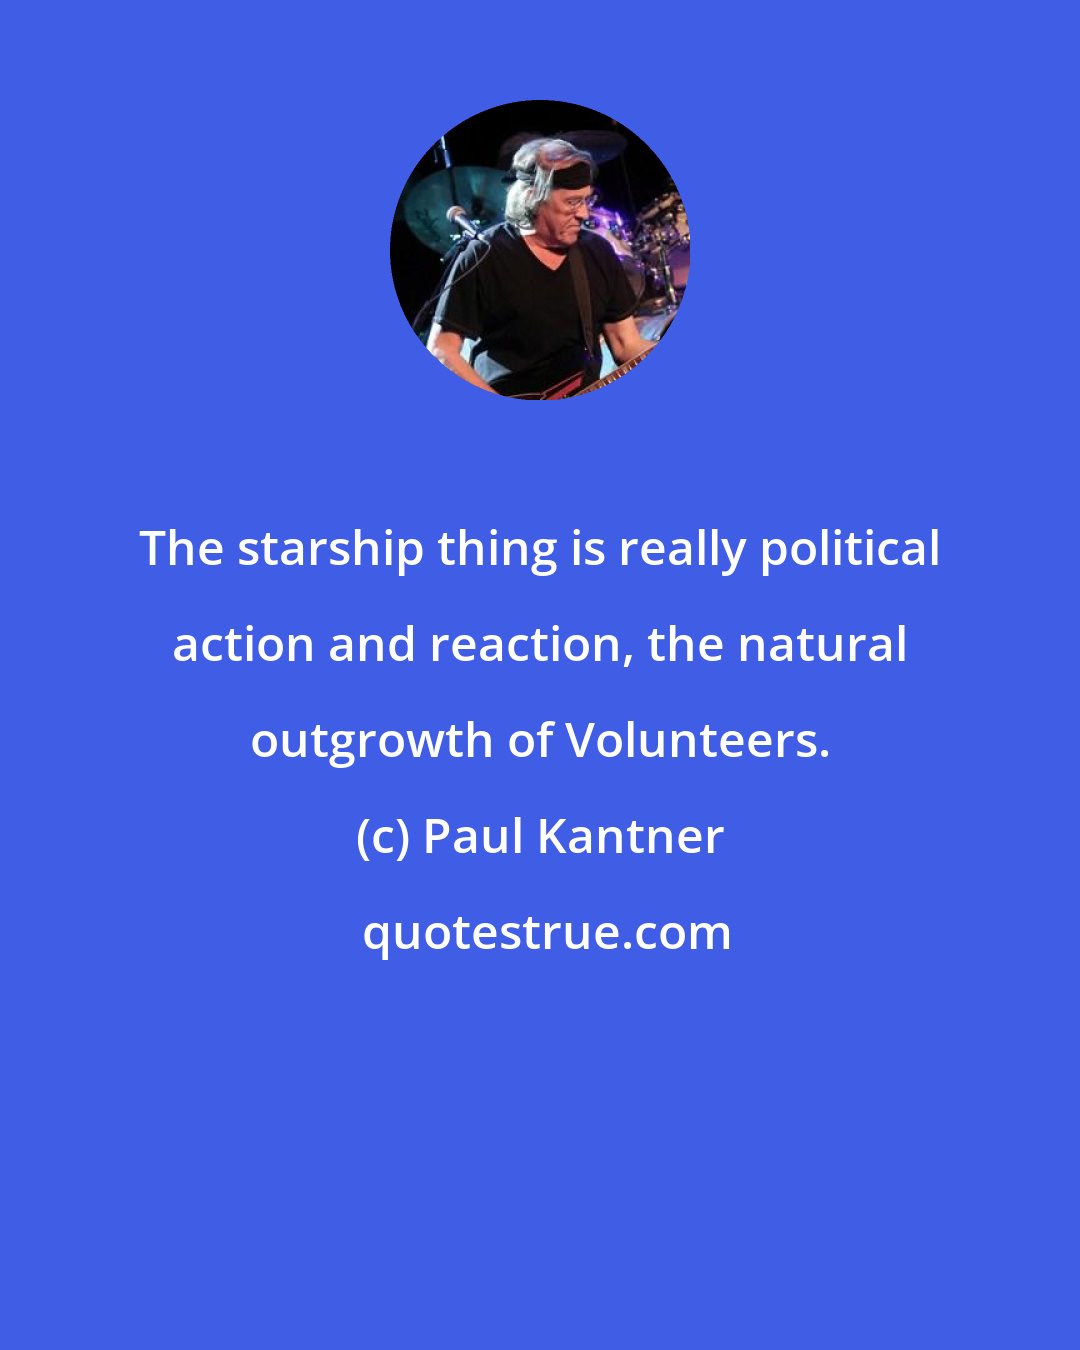 Paul Kantner: The starship thing is really political action and reaction, the natural outgrowth of Volunteers.